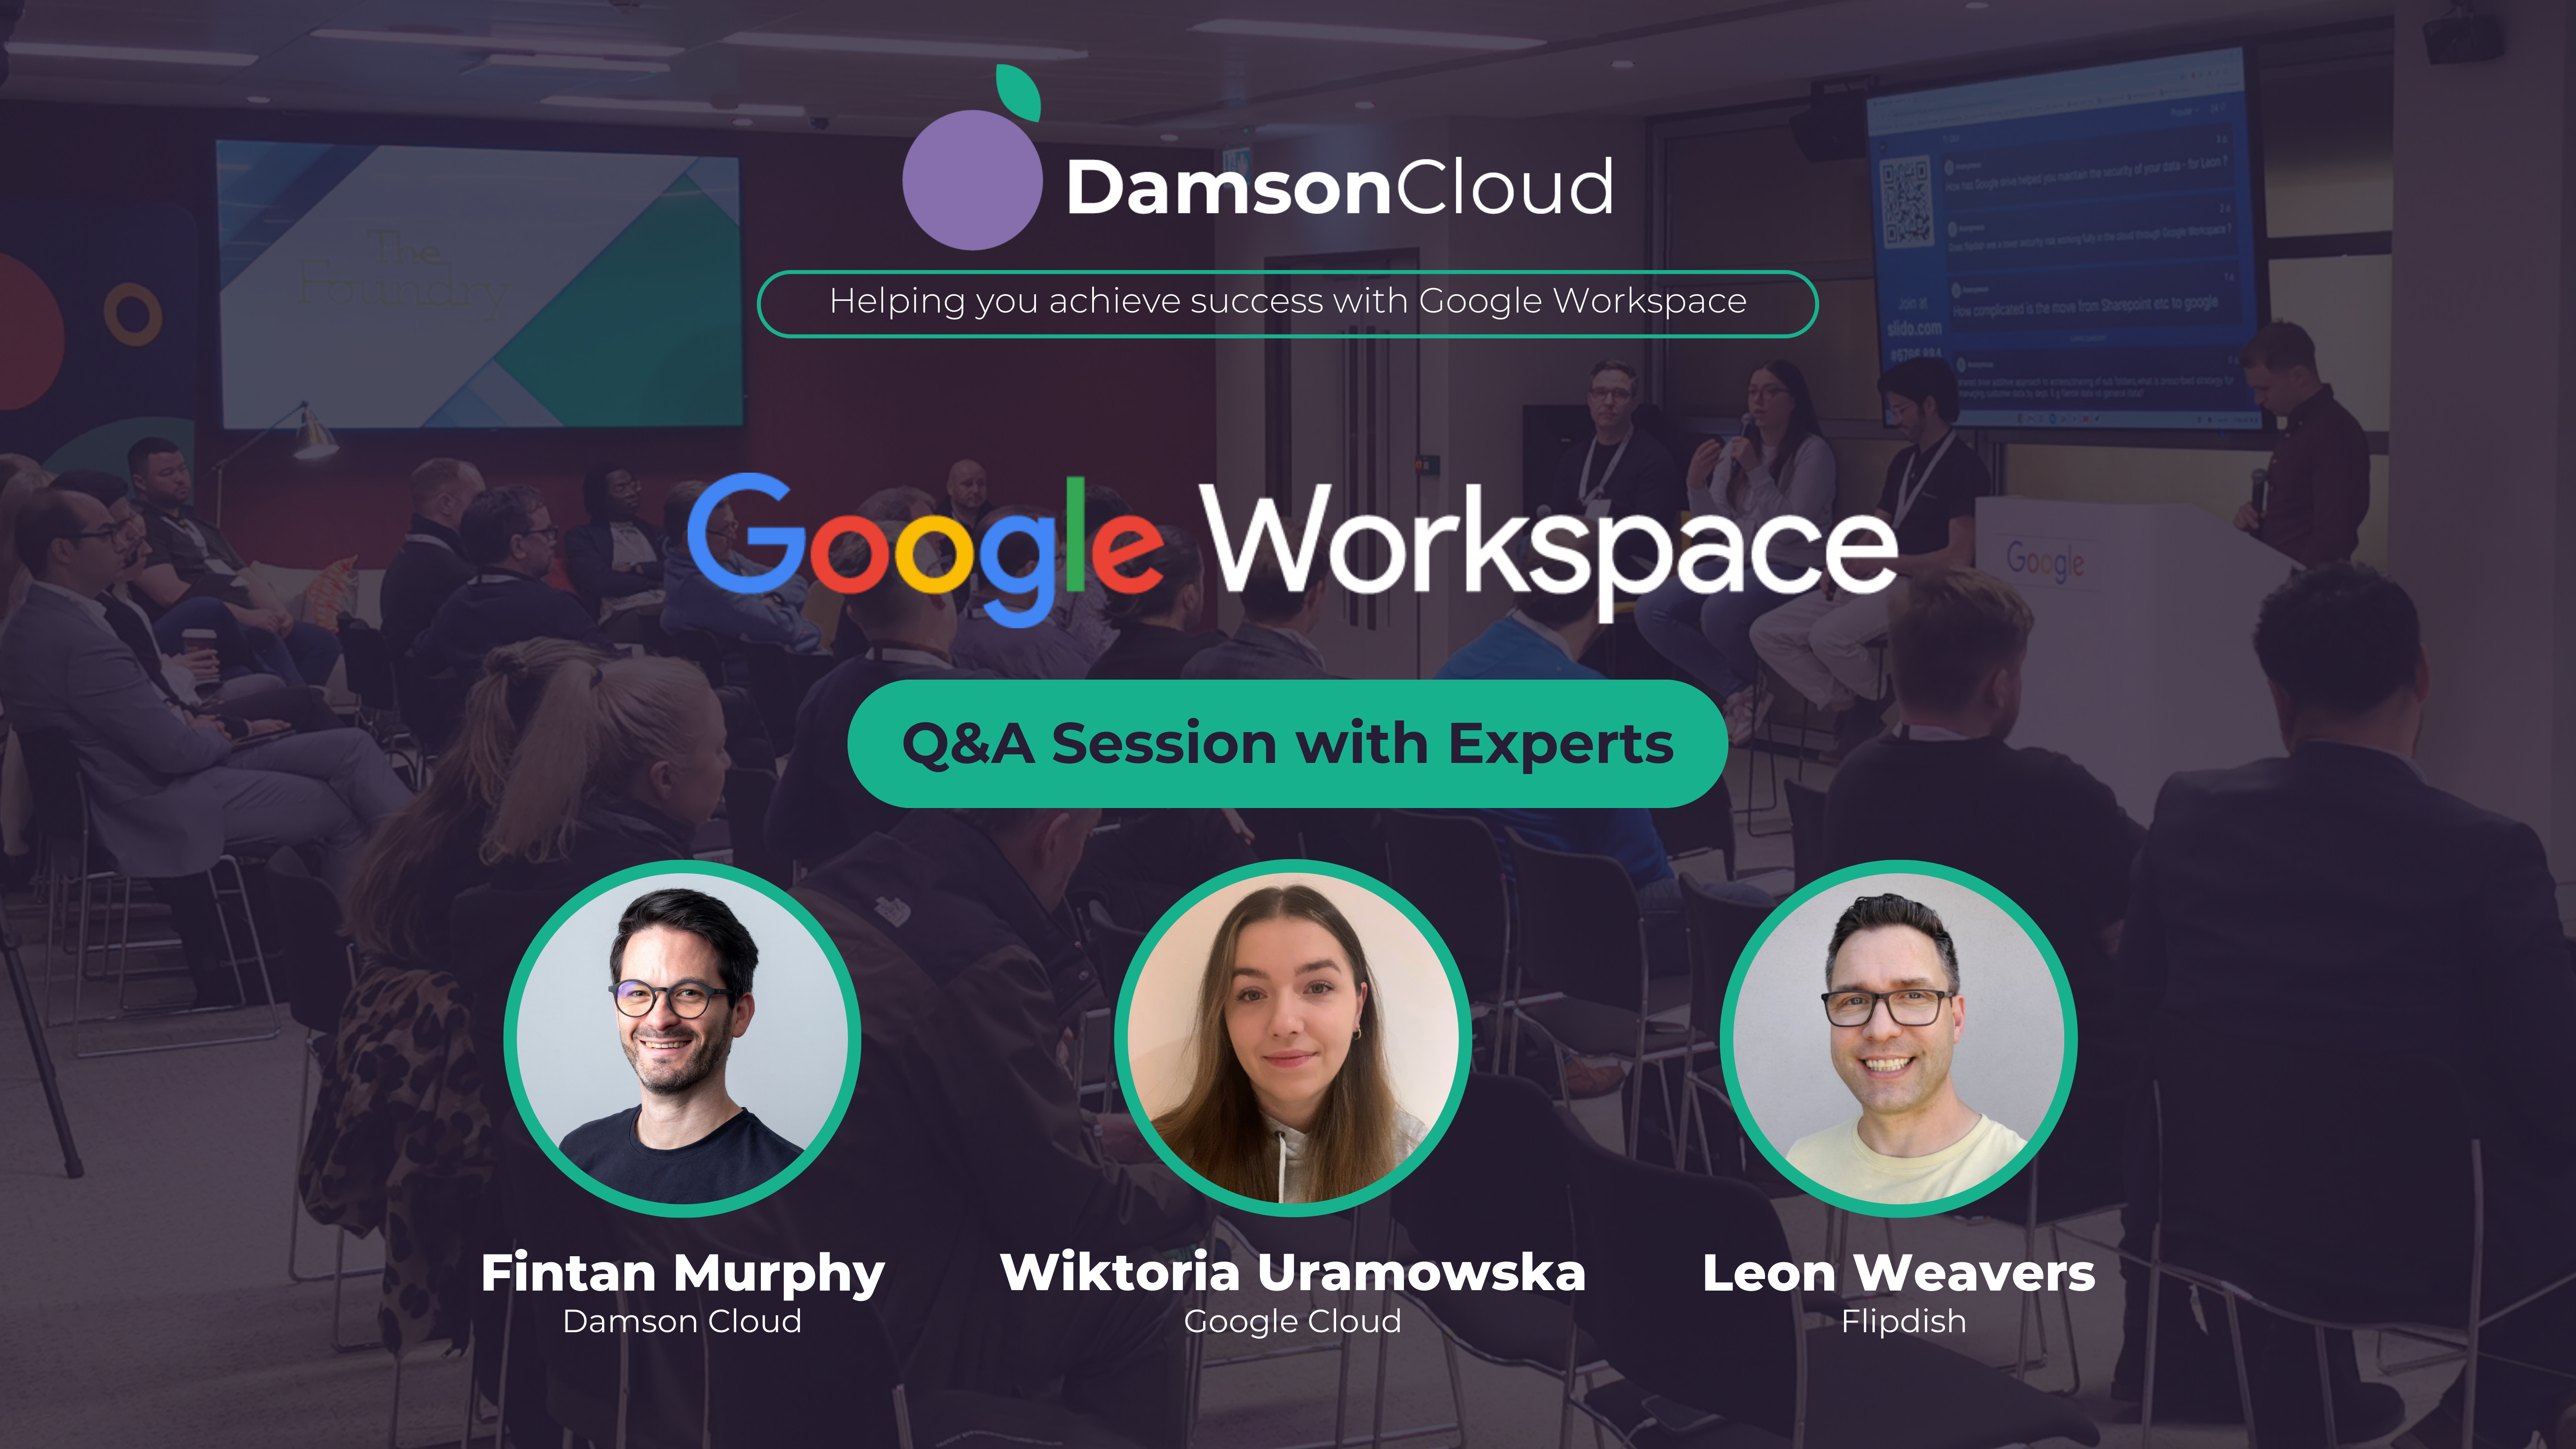 Damson Cloud and Google Event: Transform your business with Google Workspace – Q&A session